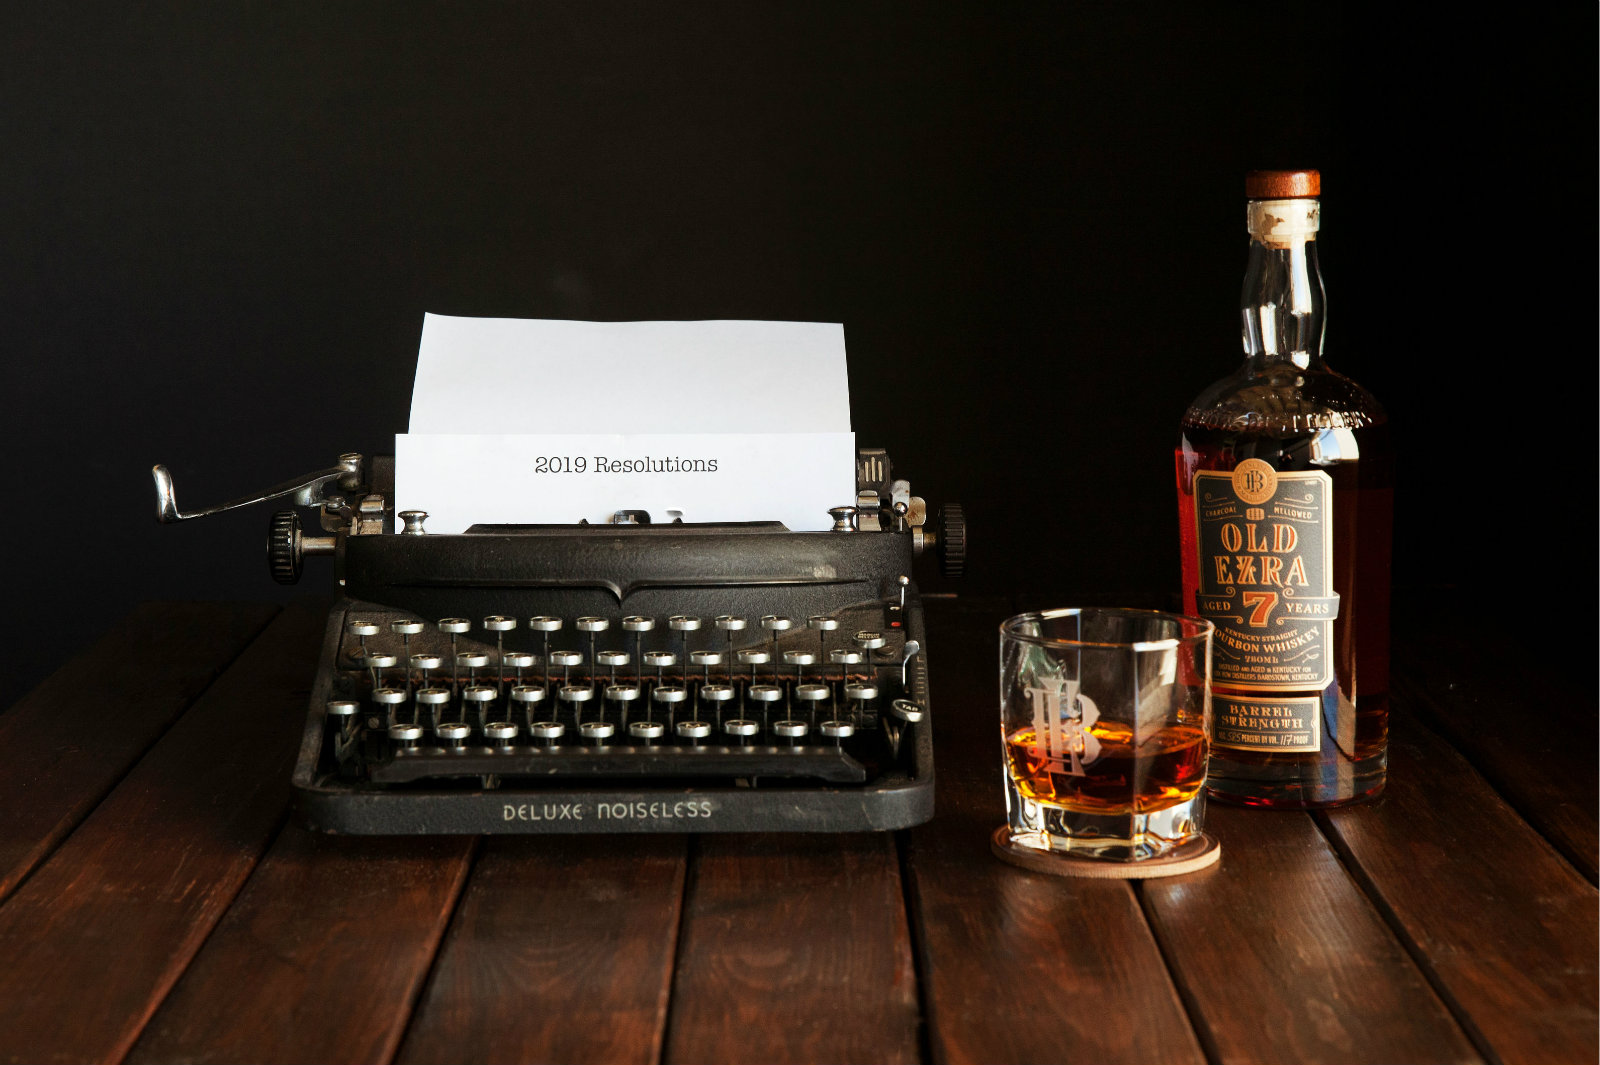 A bottle of Old Ezra and a glass of bourbon sitting next to a typewriter